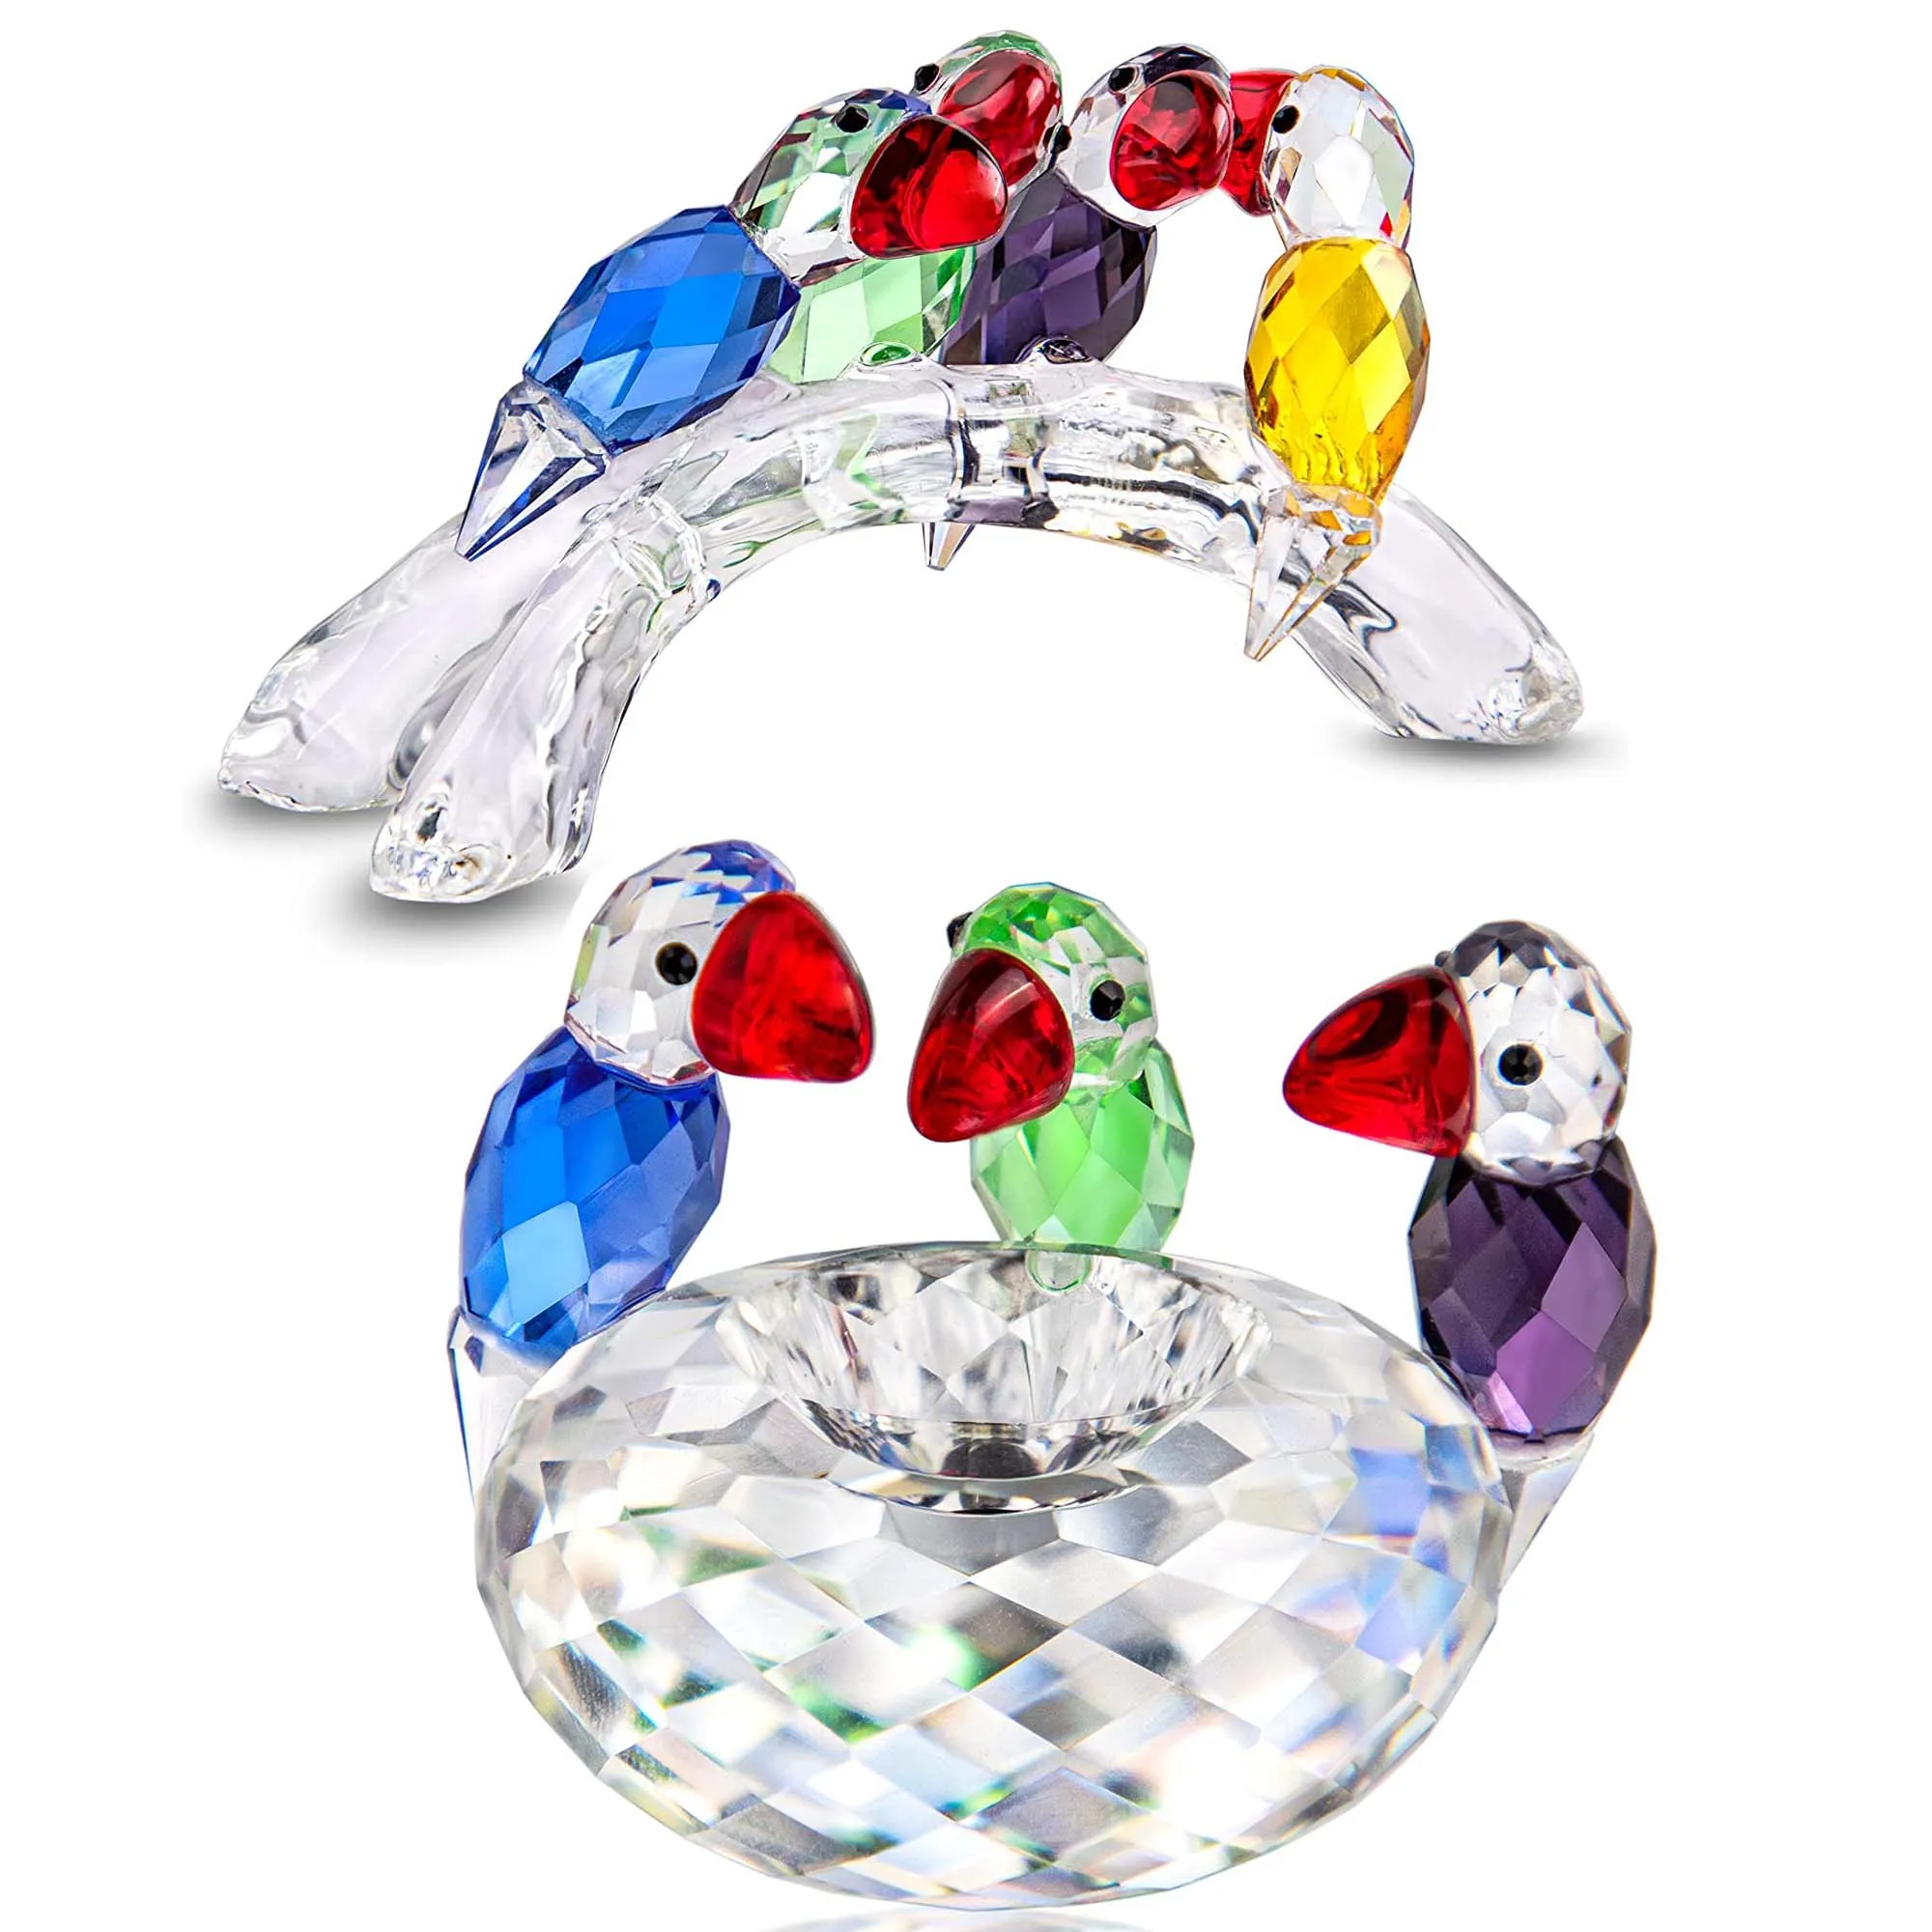 H&D Crystal Bird Figurine Collectible Art Glass Animal Figurines for Home Decor Gifts